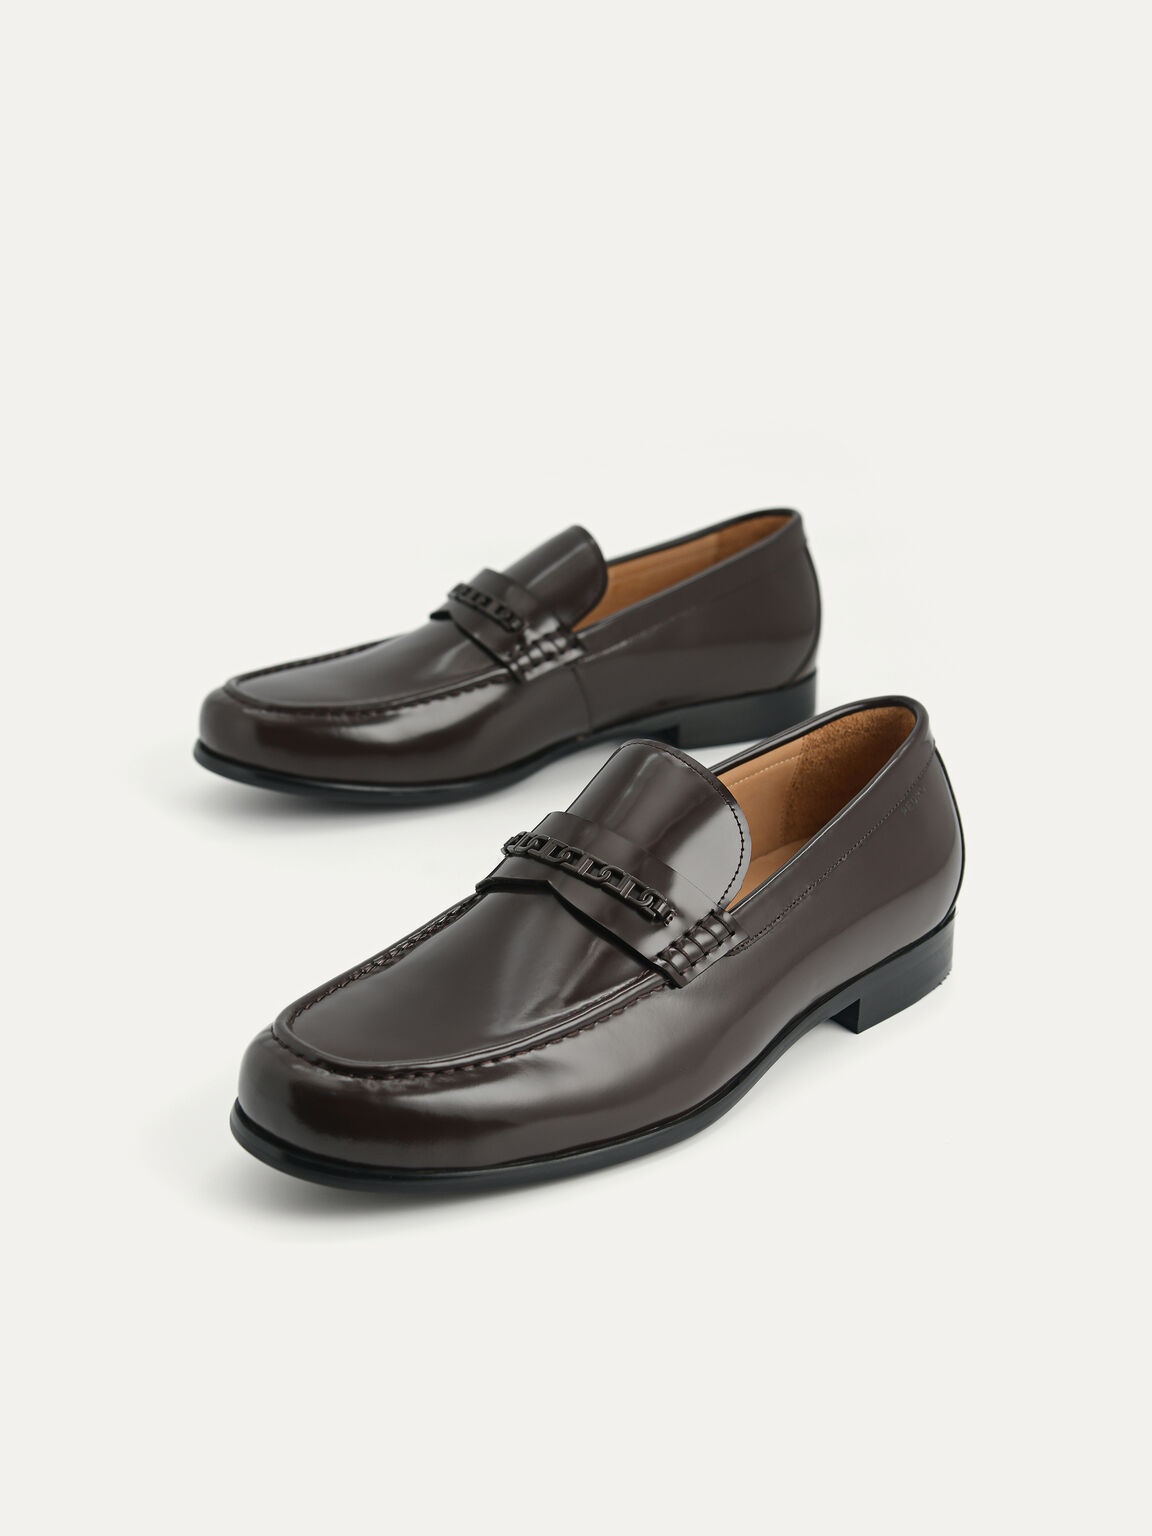 Icon Leather Penny Loafers, Dark Brown, hi-res